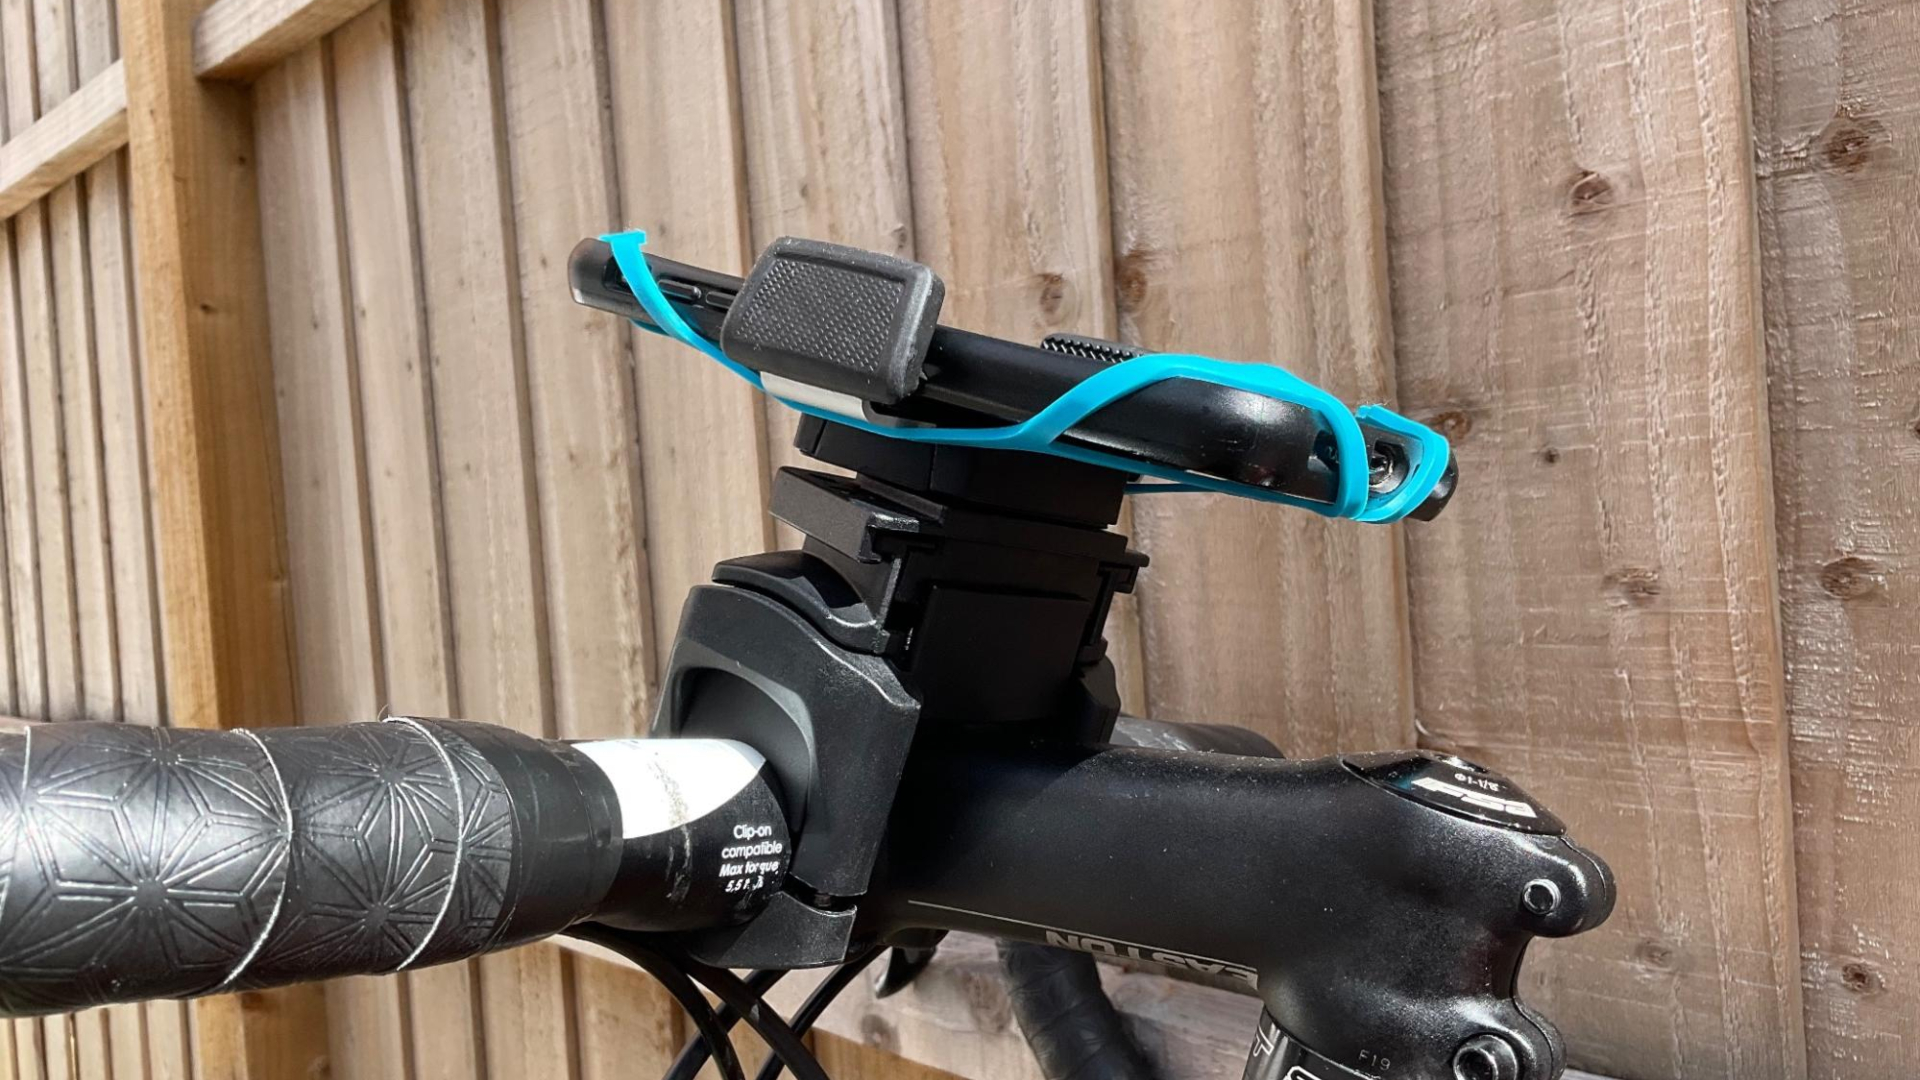 Thule Smartphone Bike Mount review - simple, effective and very